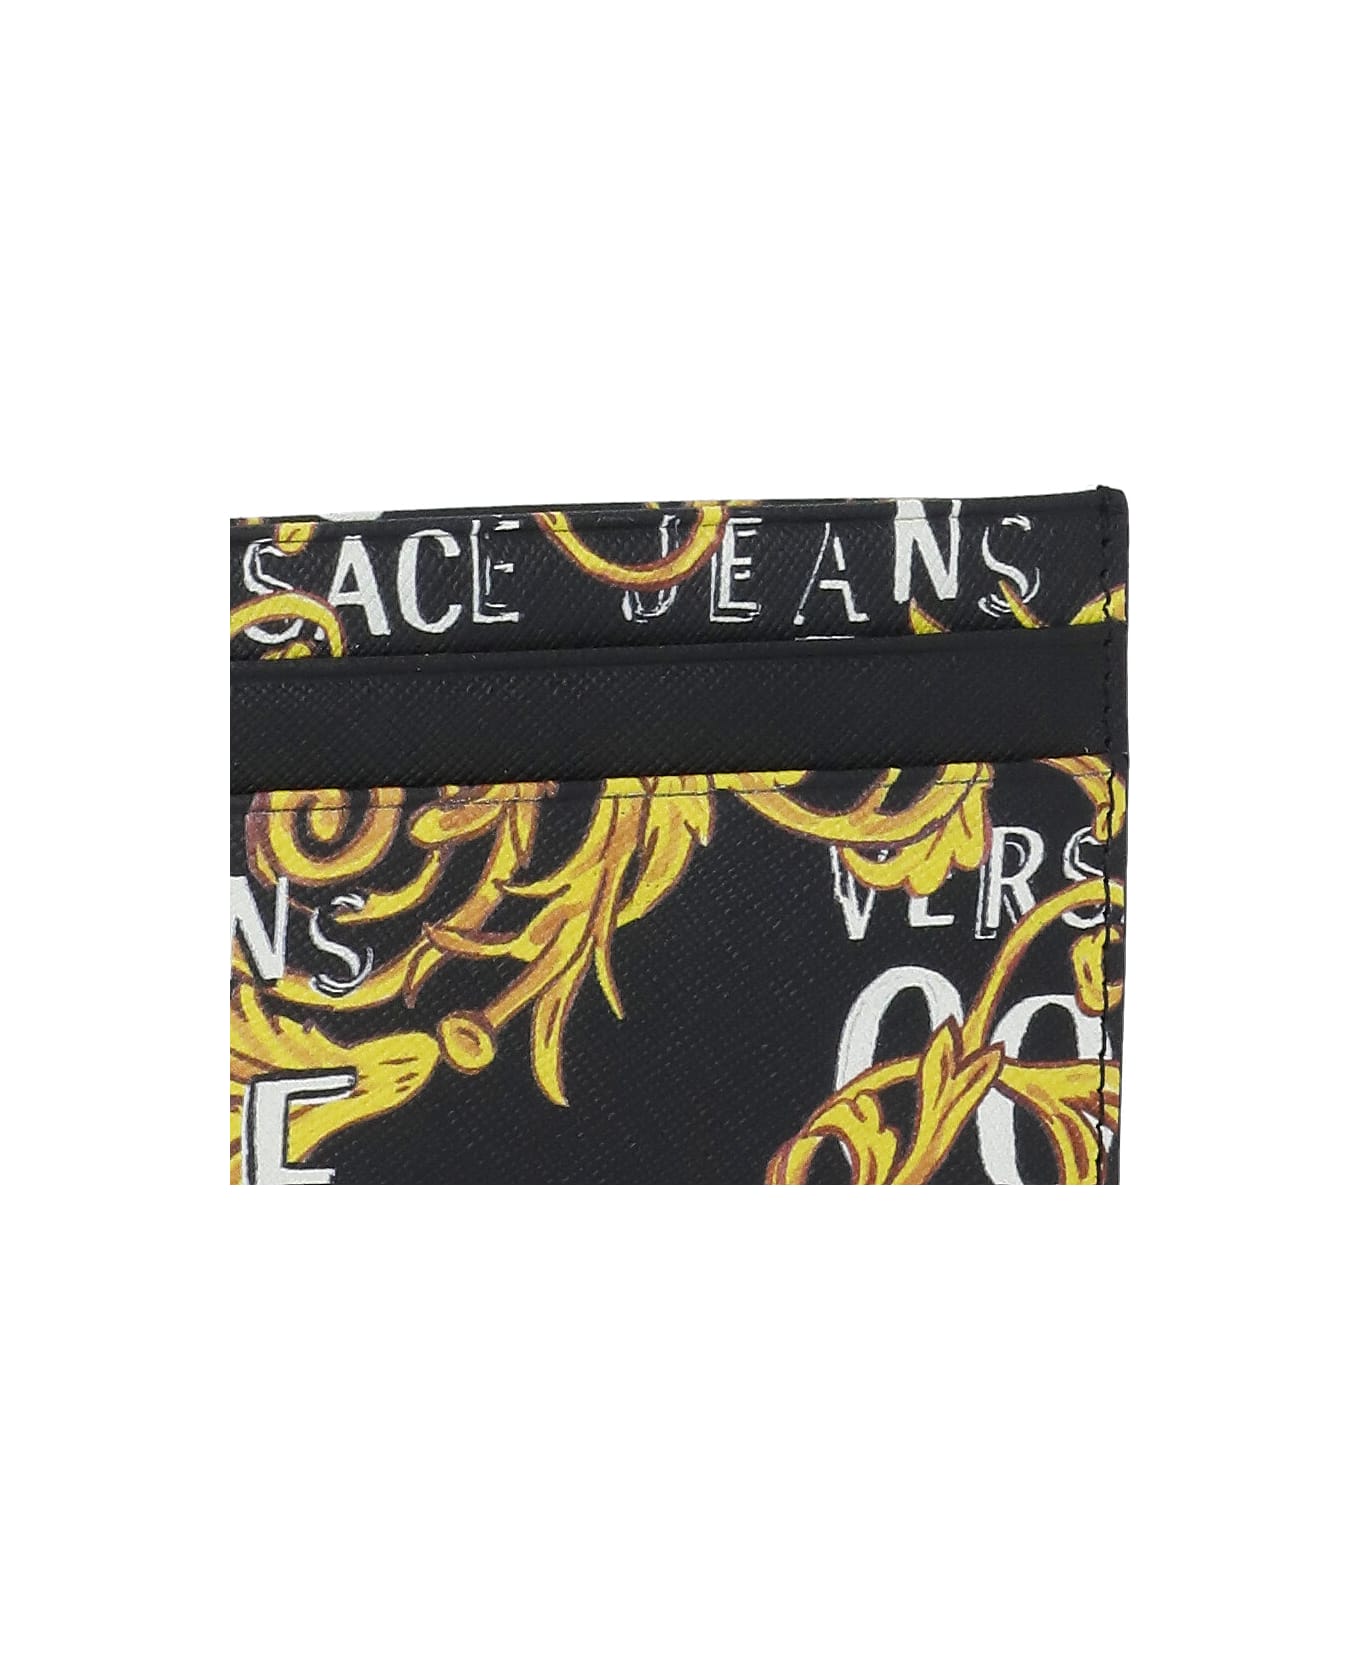 Versace Jeans Couture Logo Cards Holder - Black